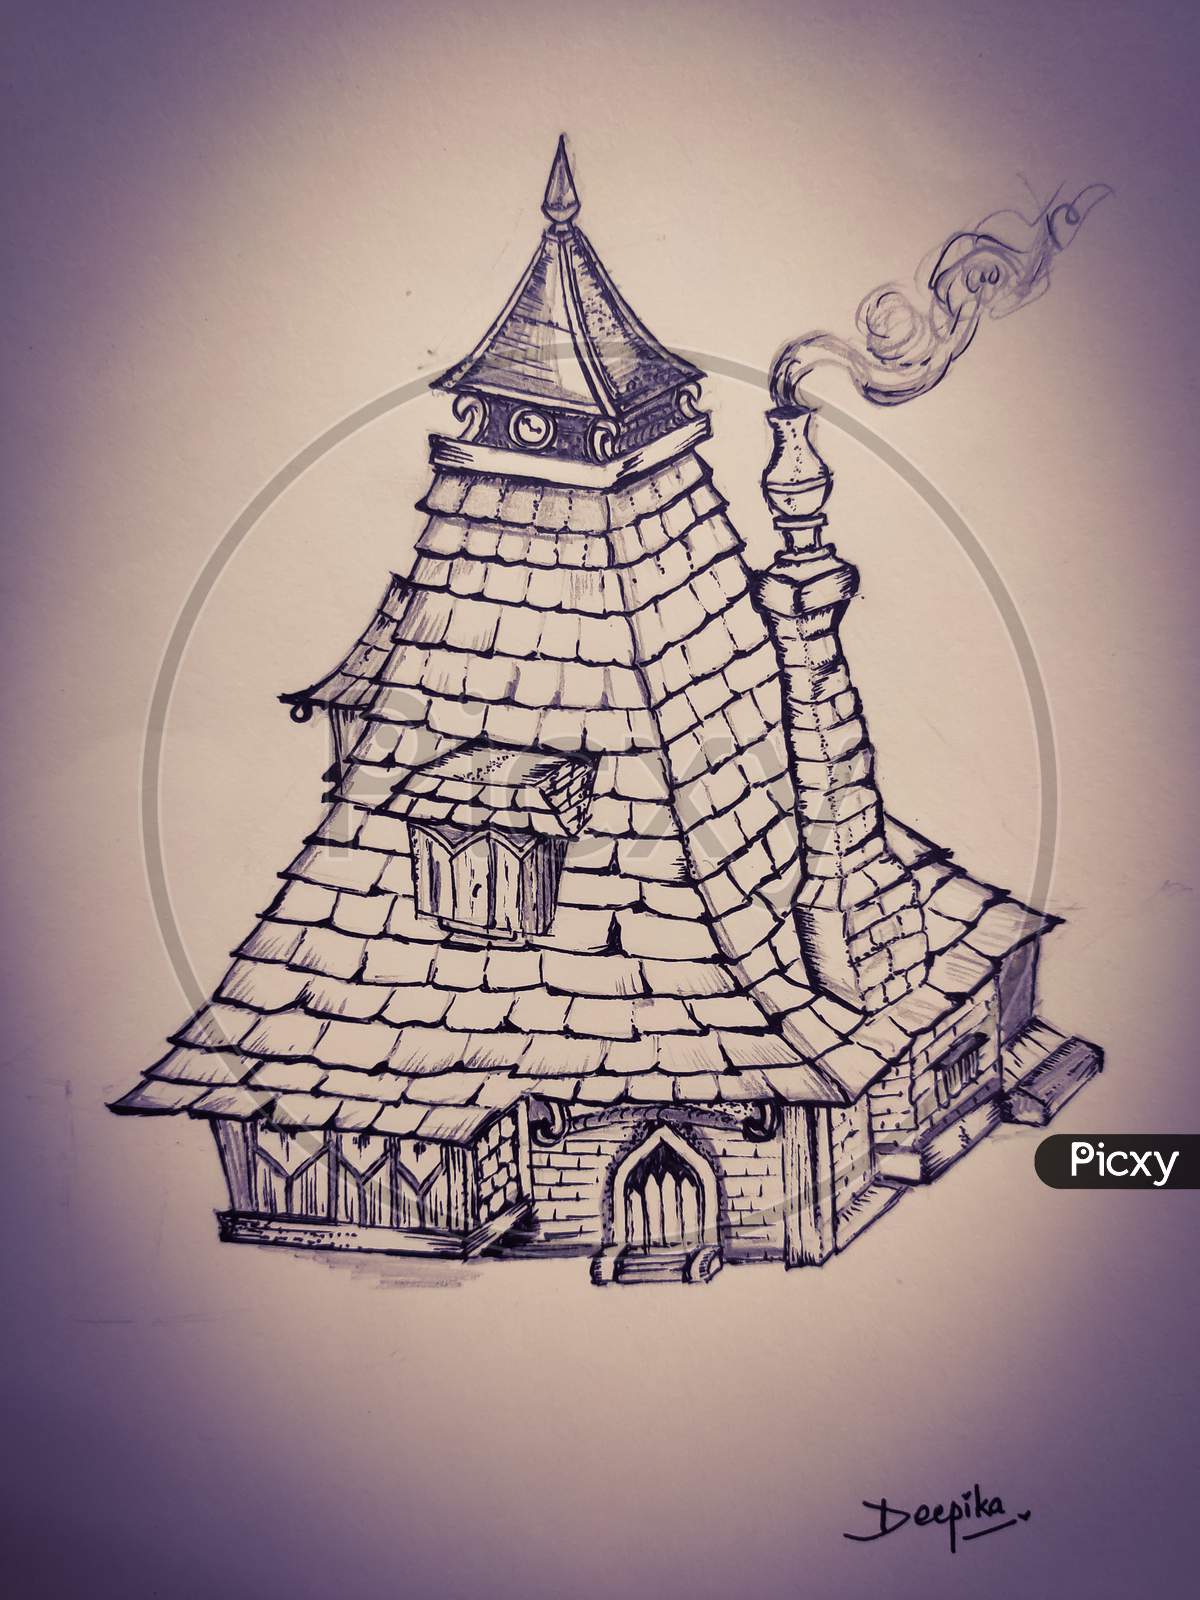 A pencil sketch of an old fashioned fantasy house from the cartoons. The house is made up of slate roof and wooden structure with smoke coming out of the chimney.